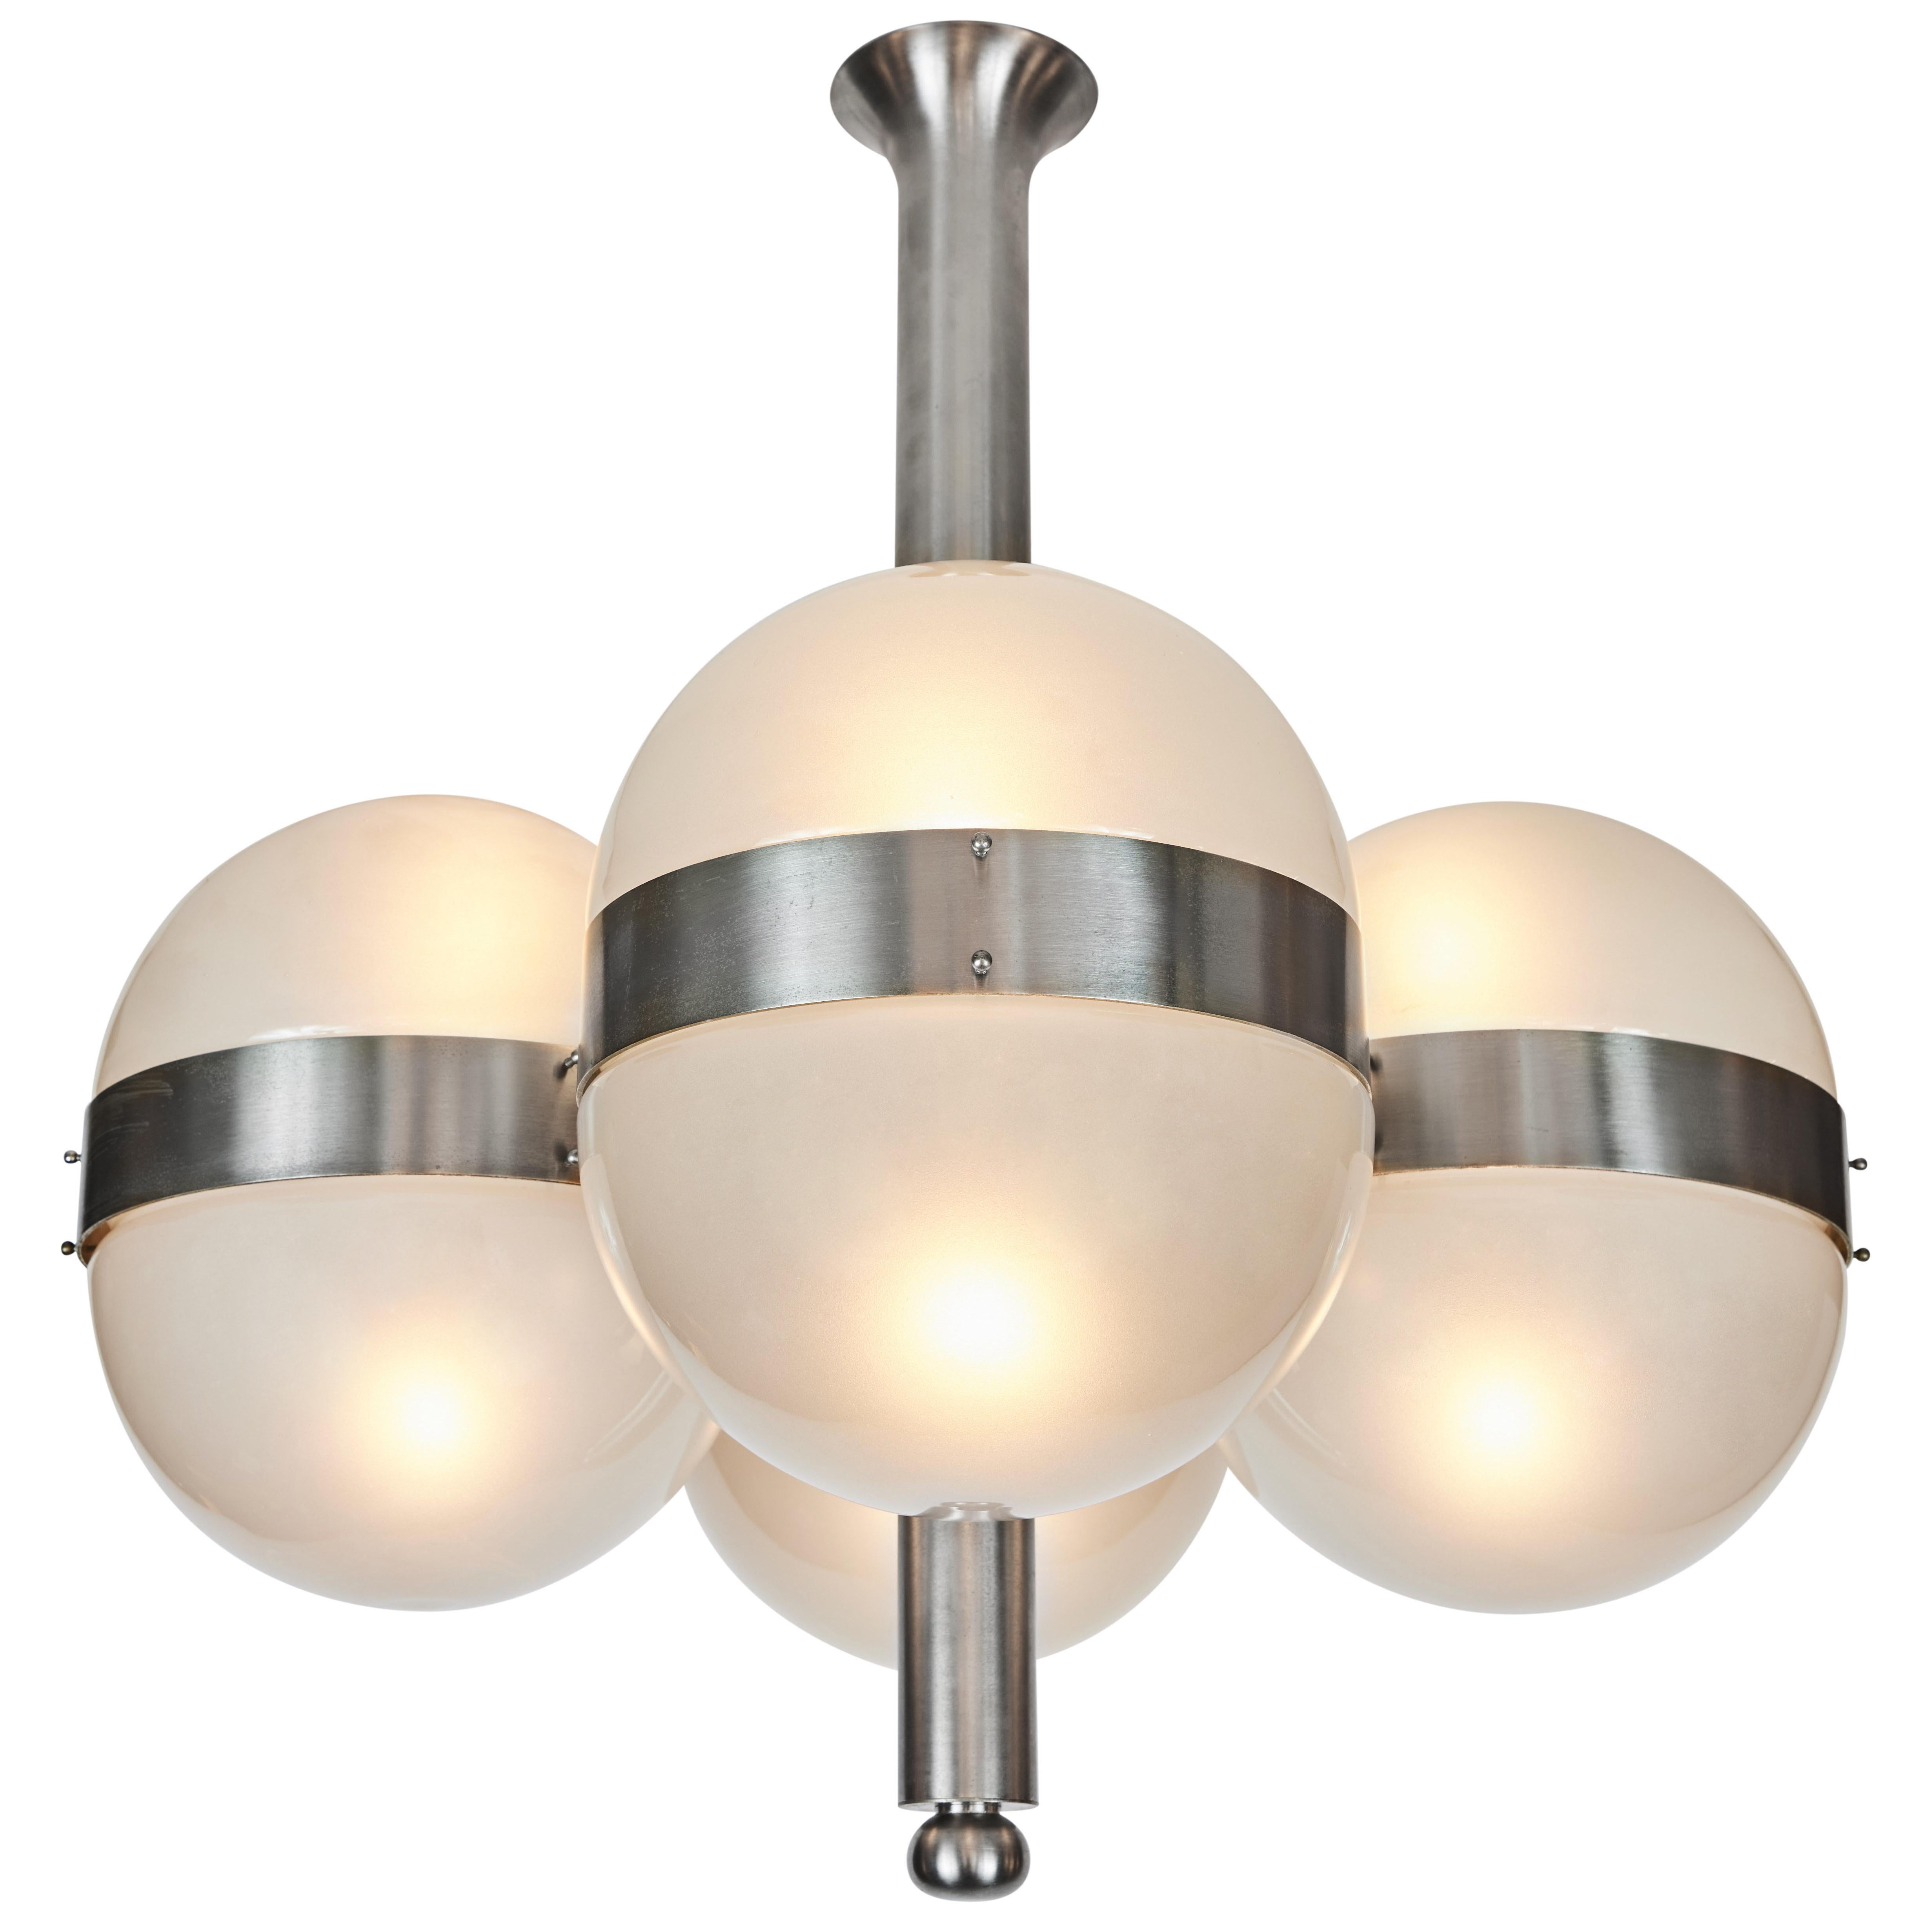 Pair of Sergio Mazza 'Tetraclio' Chandeliers for Artemide, 1960s. Designed in 1961 and executed in nickeled brass and pressed opaline glass Professionally rewired for US electrical. Accommodates 8x standard e26 60W max bulbs.

Price is for the pair.